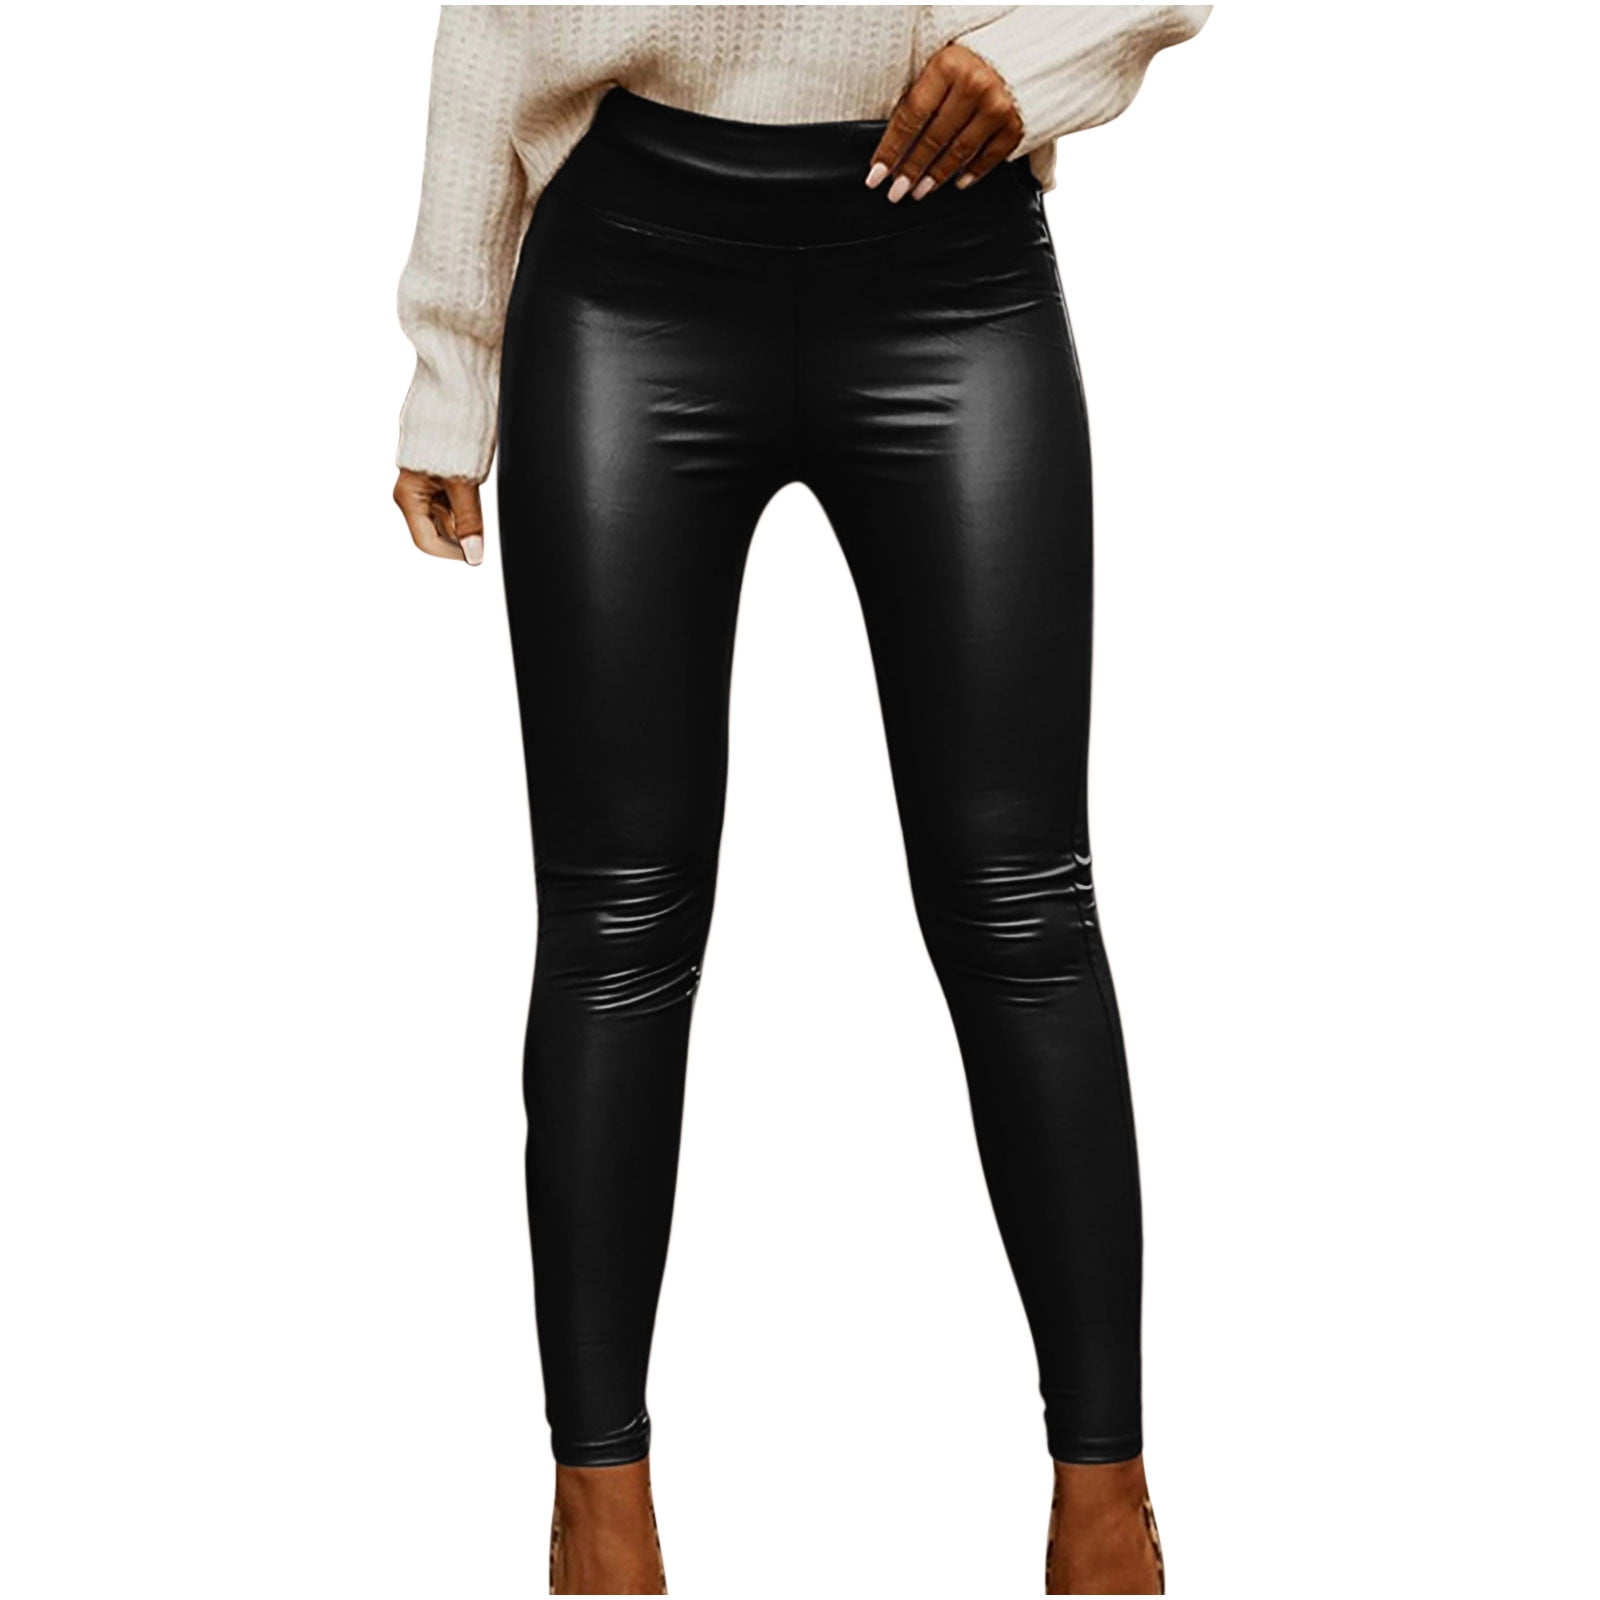 YYDGH Women's Faux Leather Leggings High Waisted Black PU Pleather